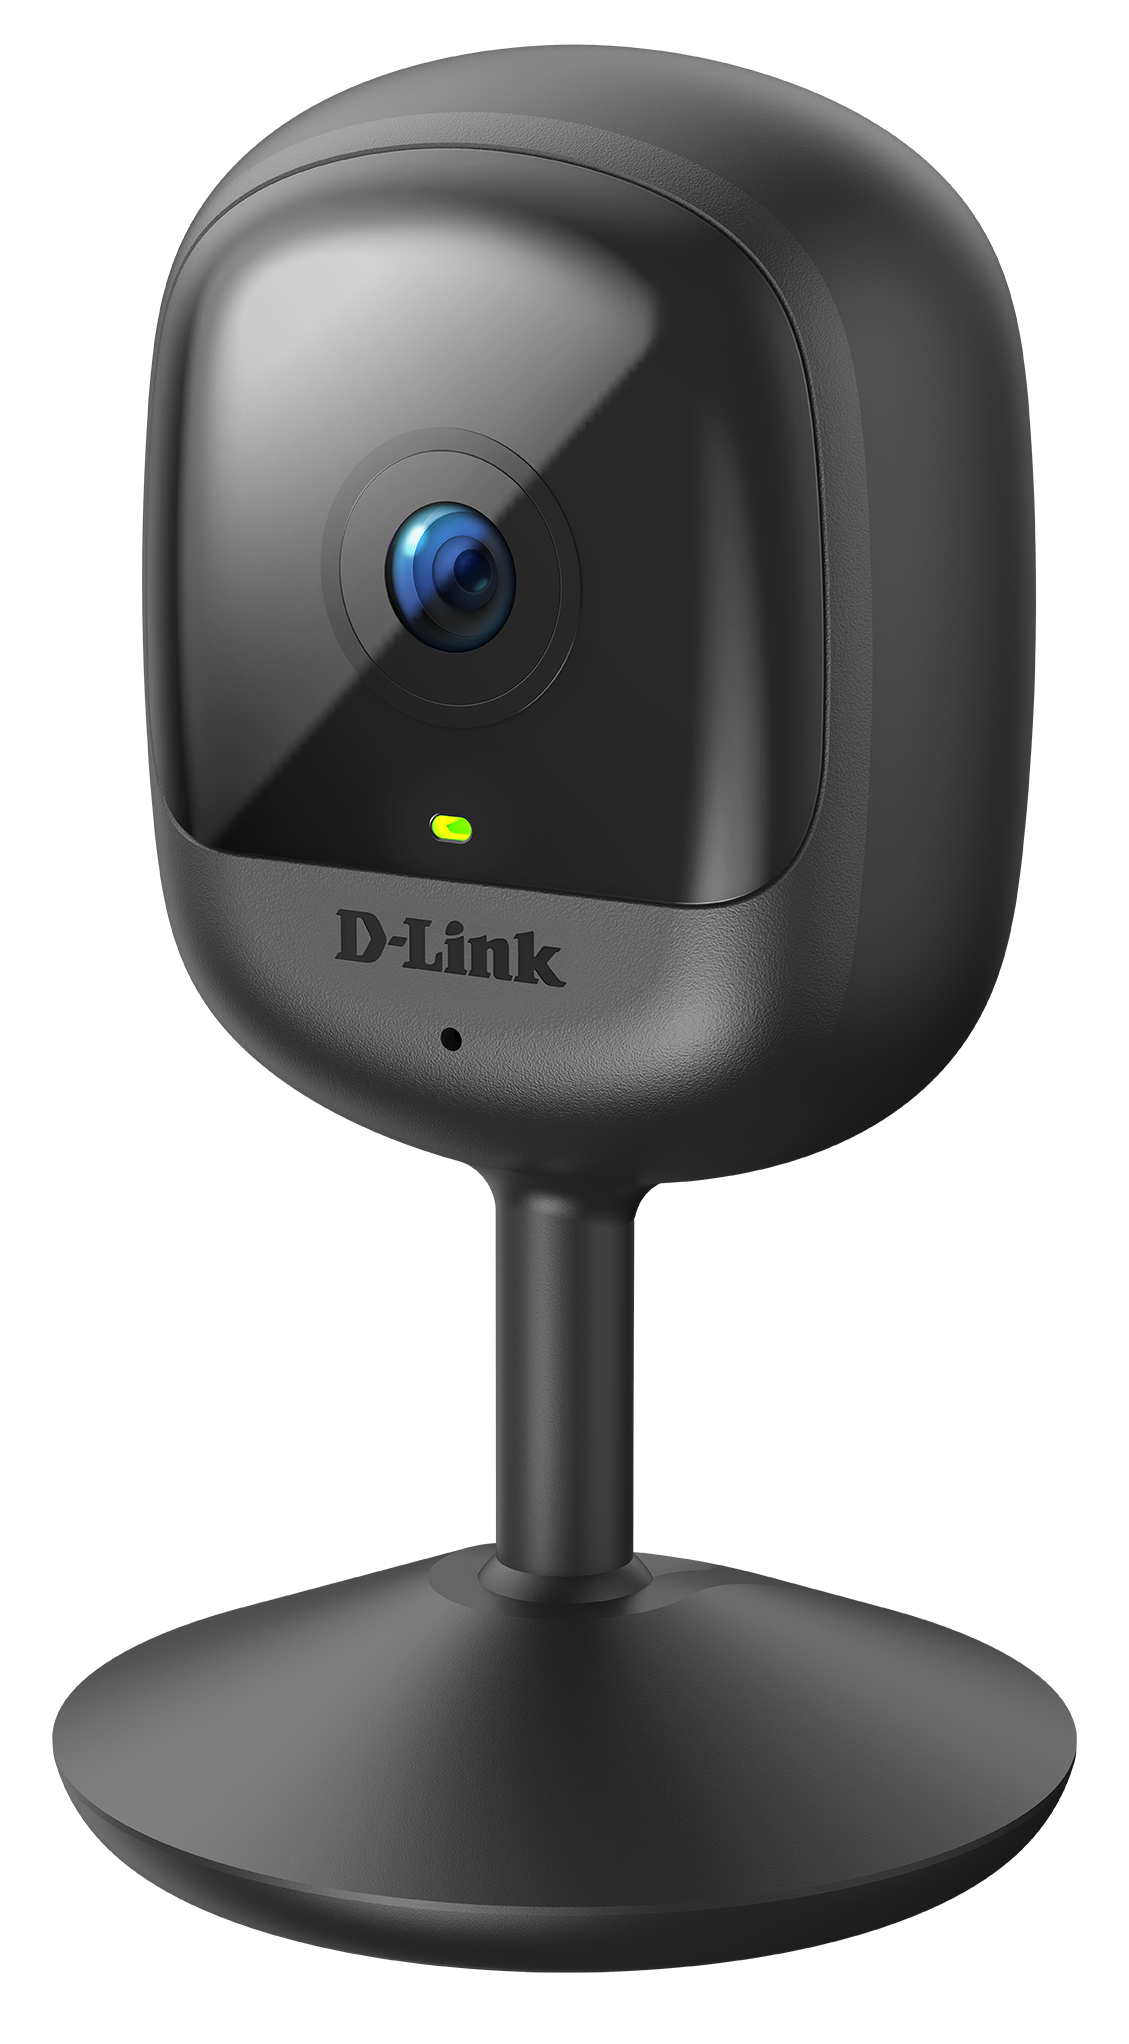 DCS-6100LH	Compact Full HD Wi-Fi Camera - left side view.